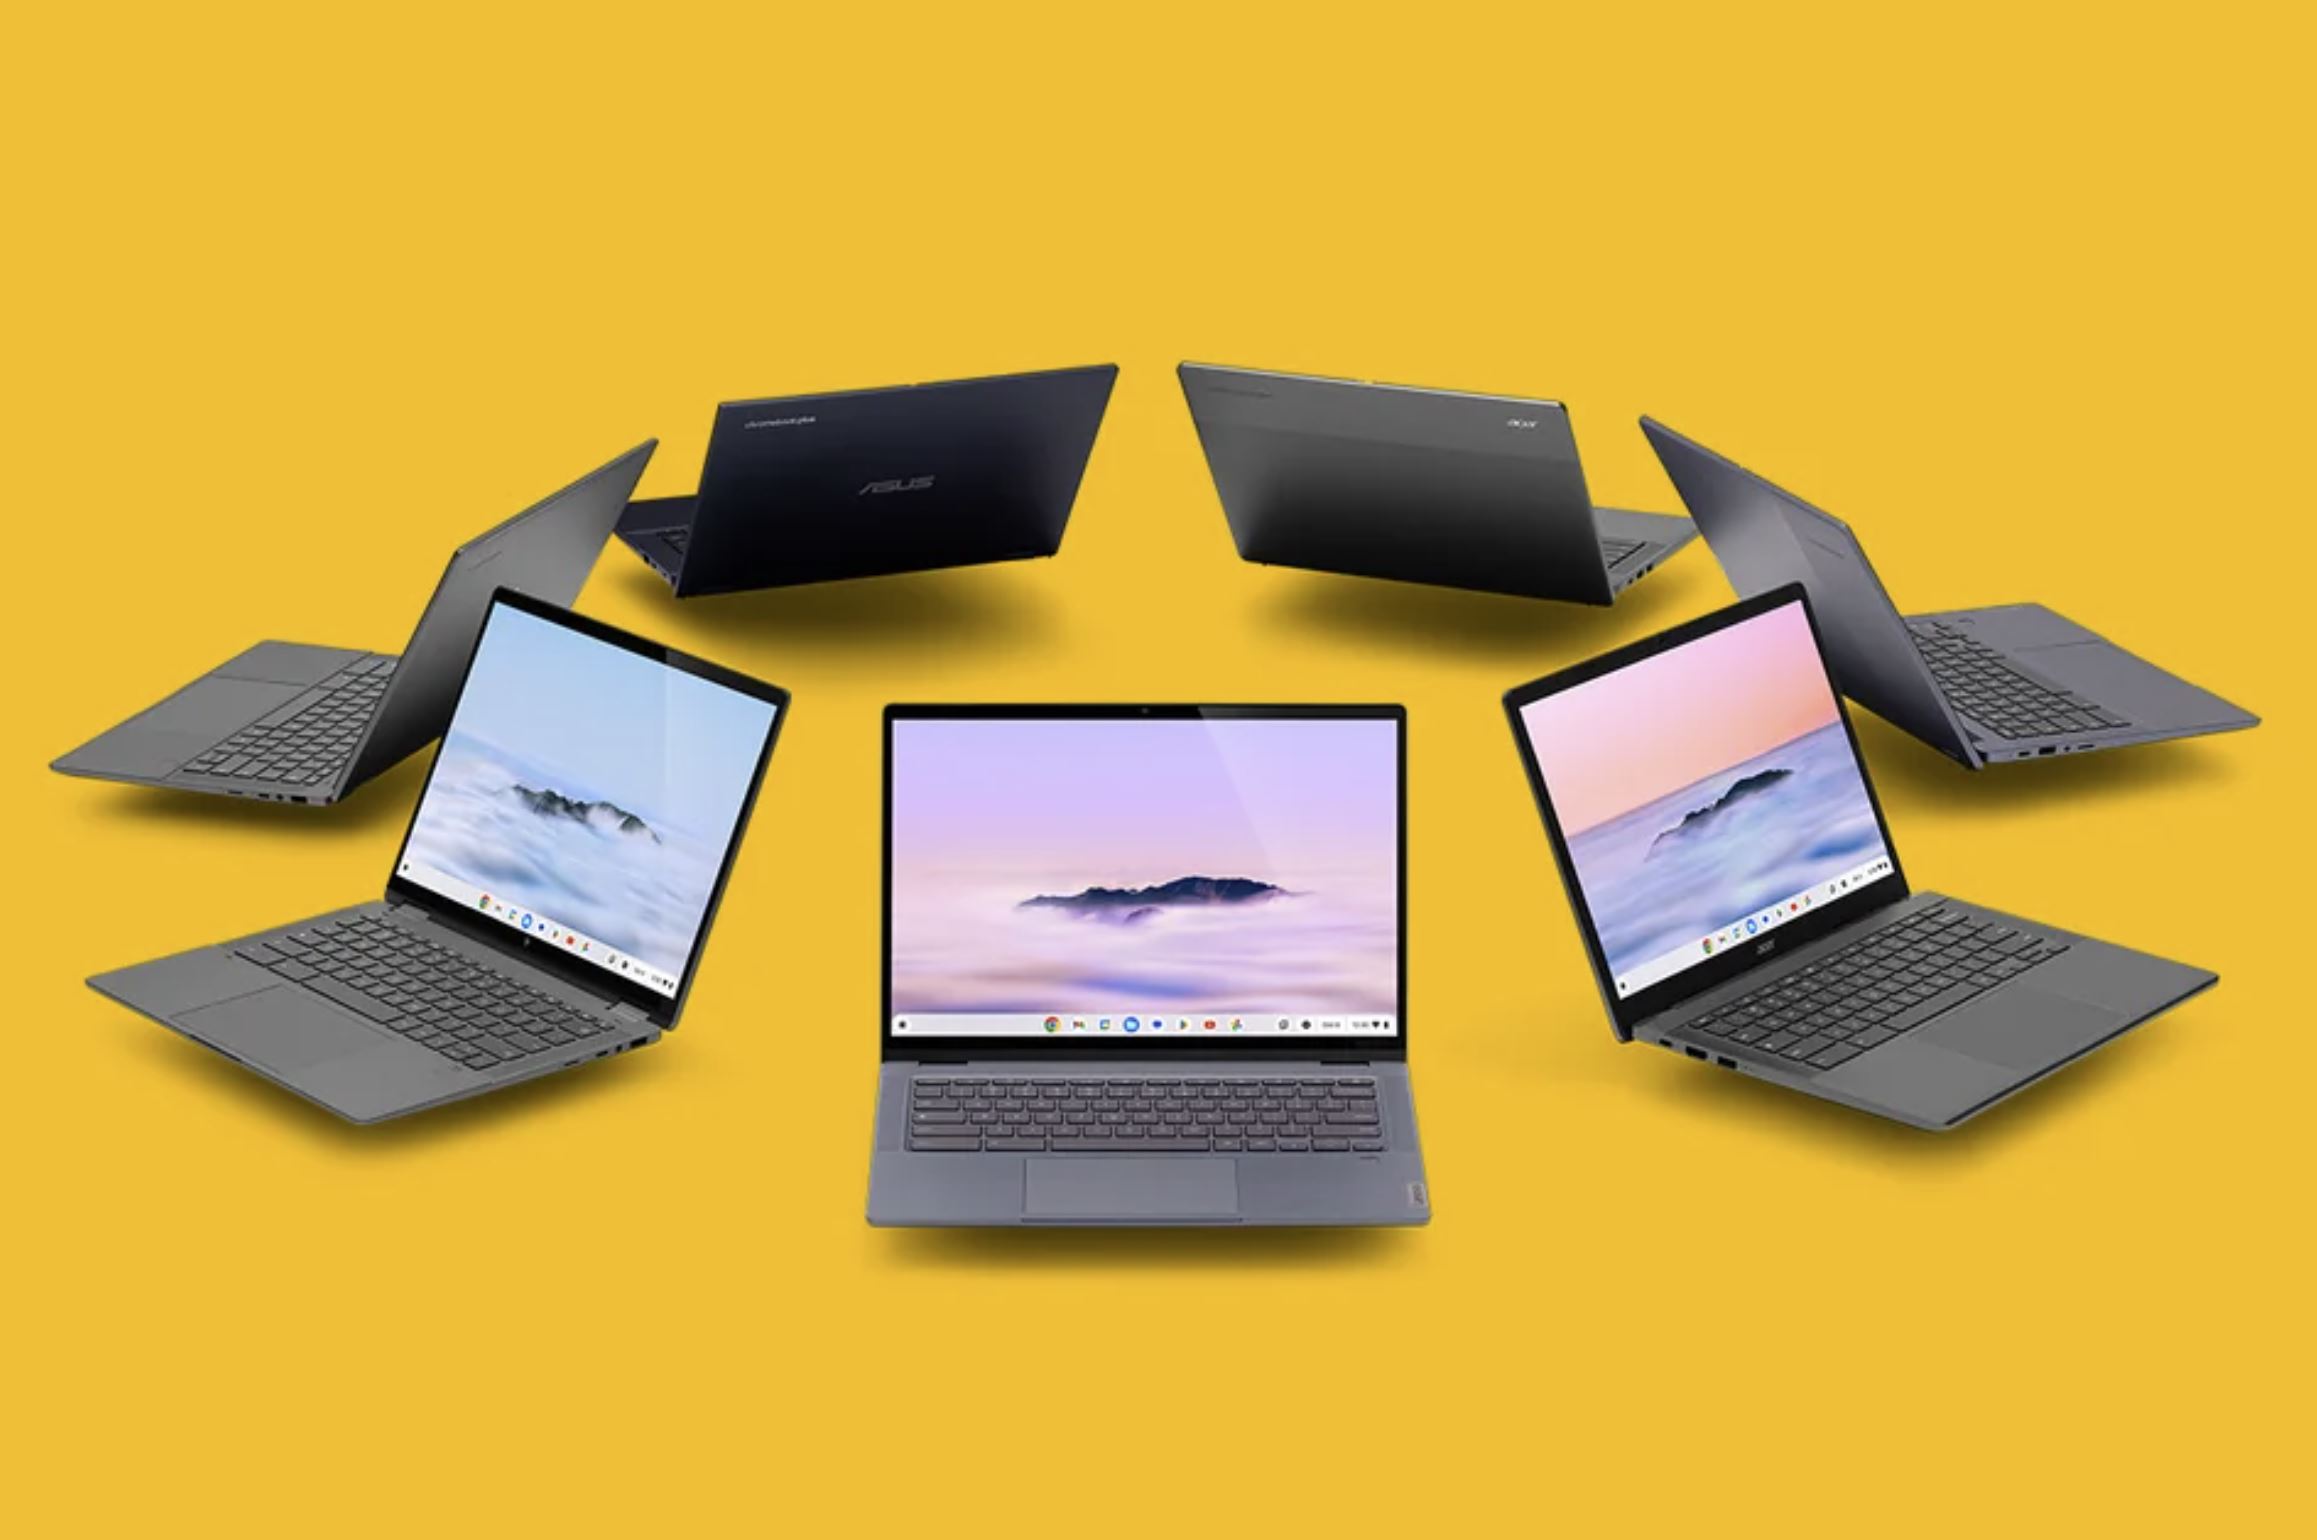 Google launches Chromebook Plus as a new brand of high-end laptops with unique features